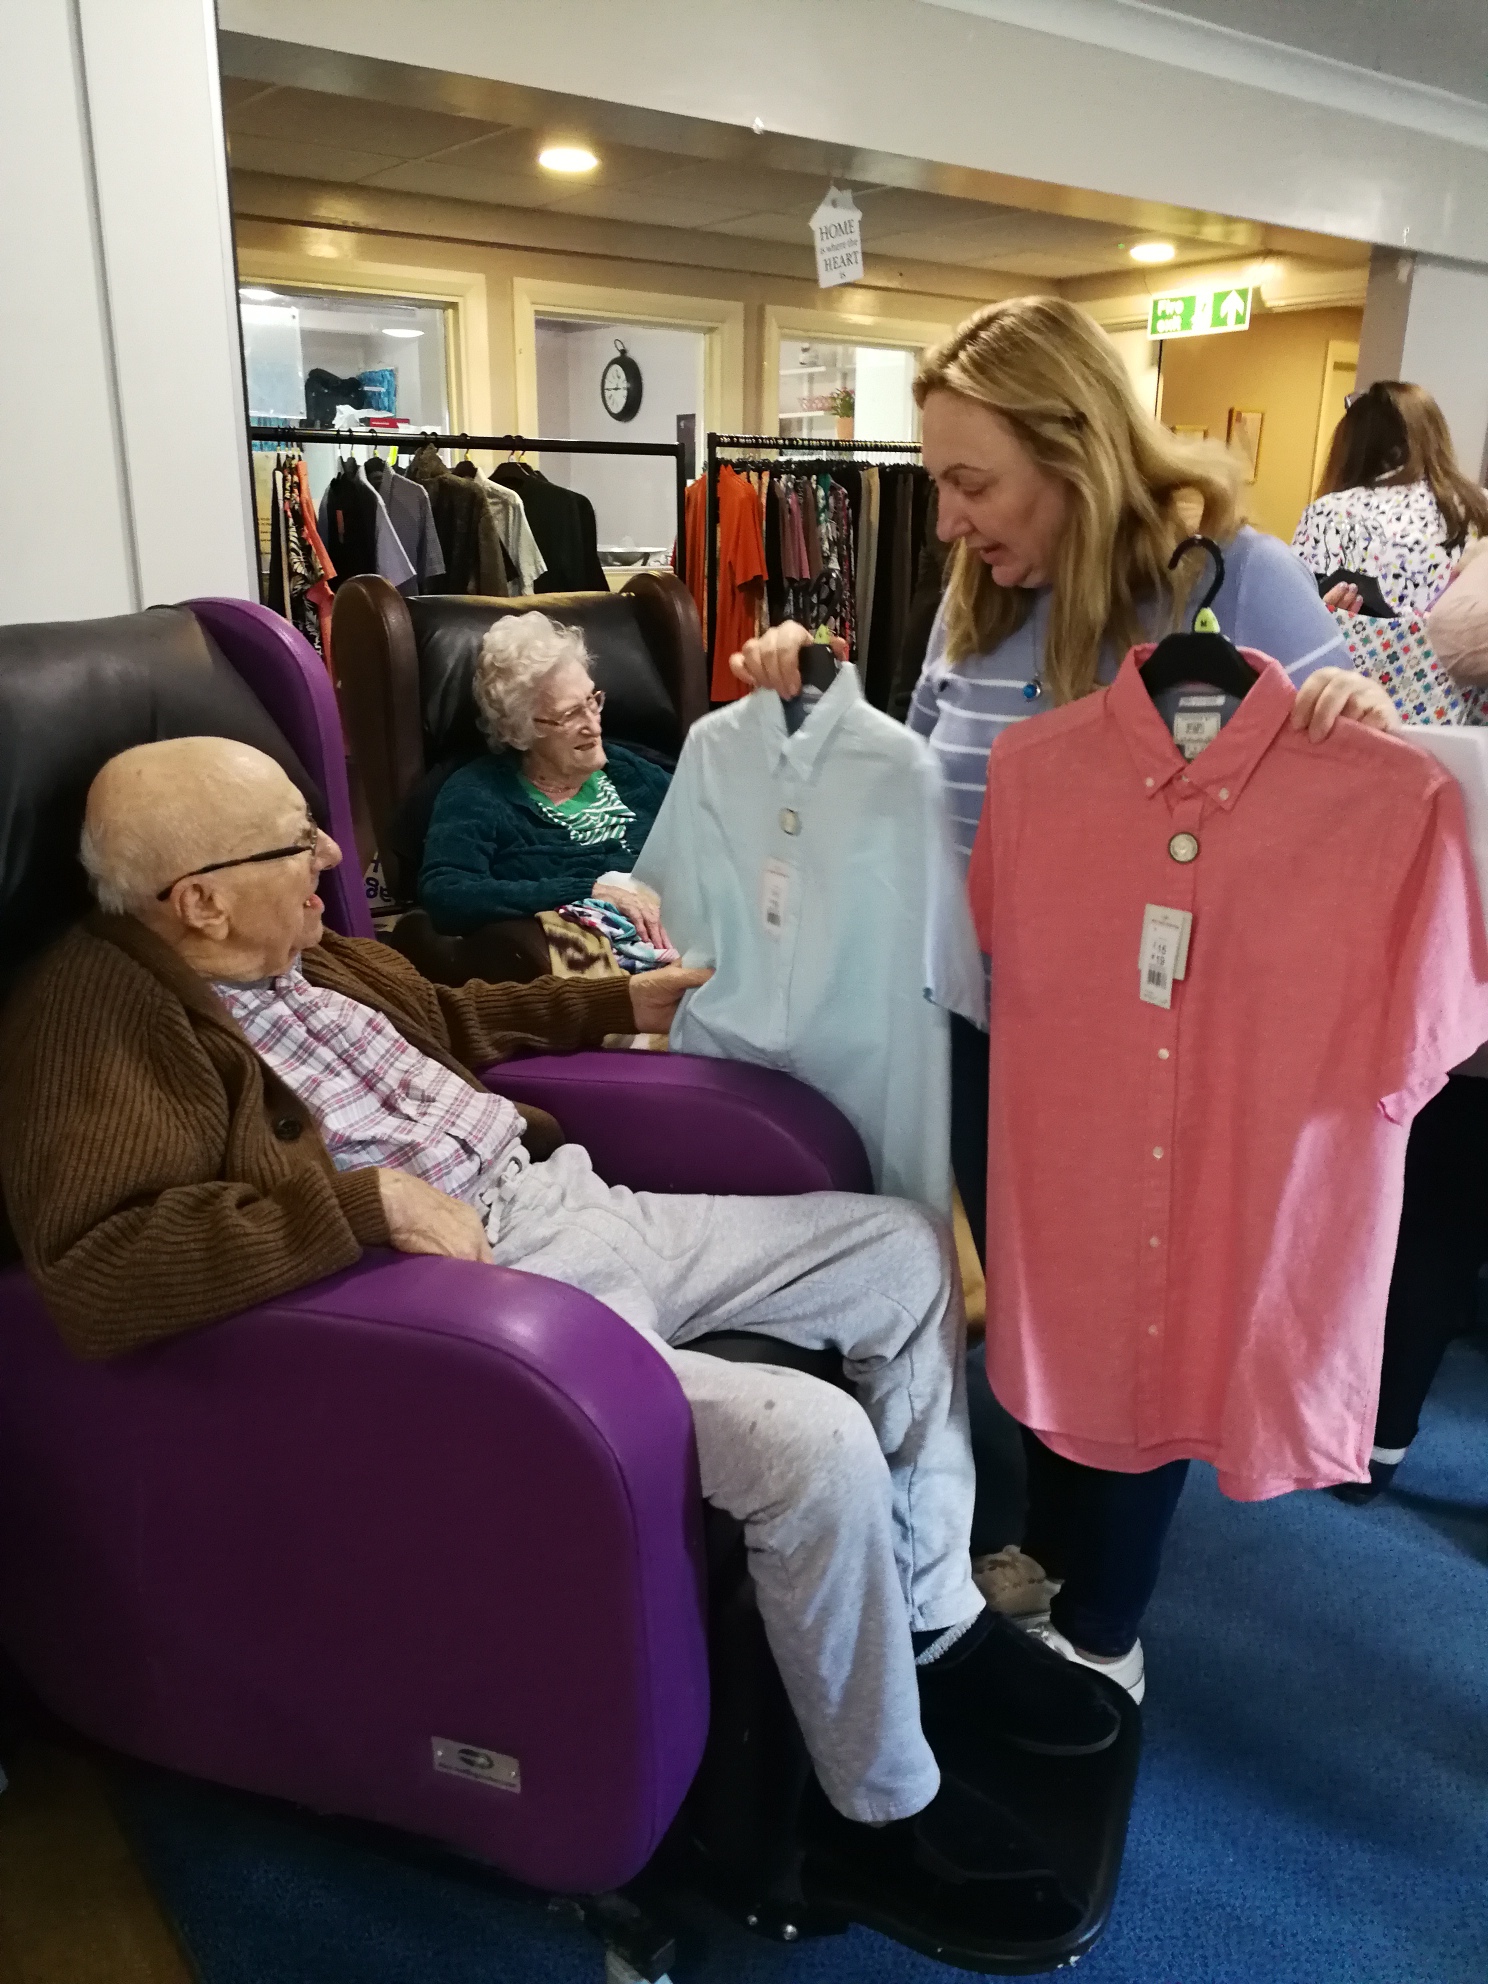 Fashion in Care Homes